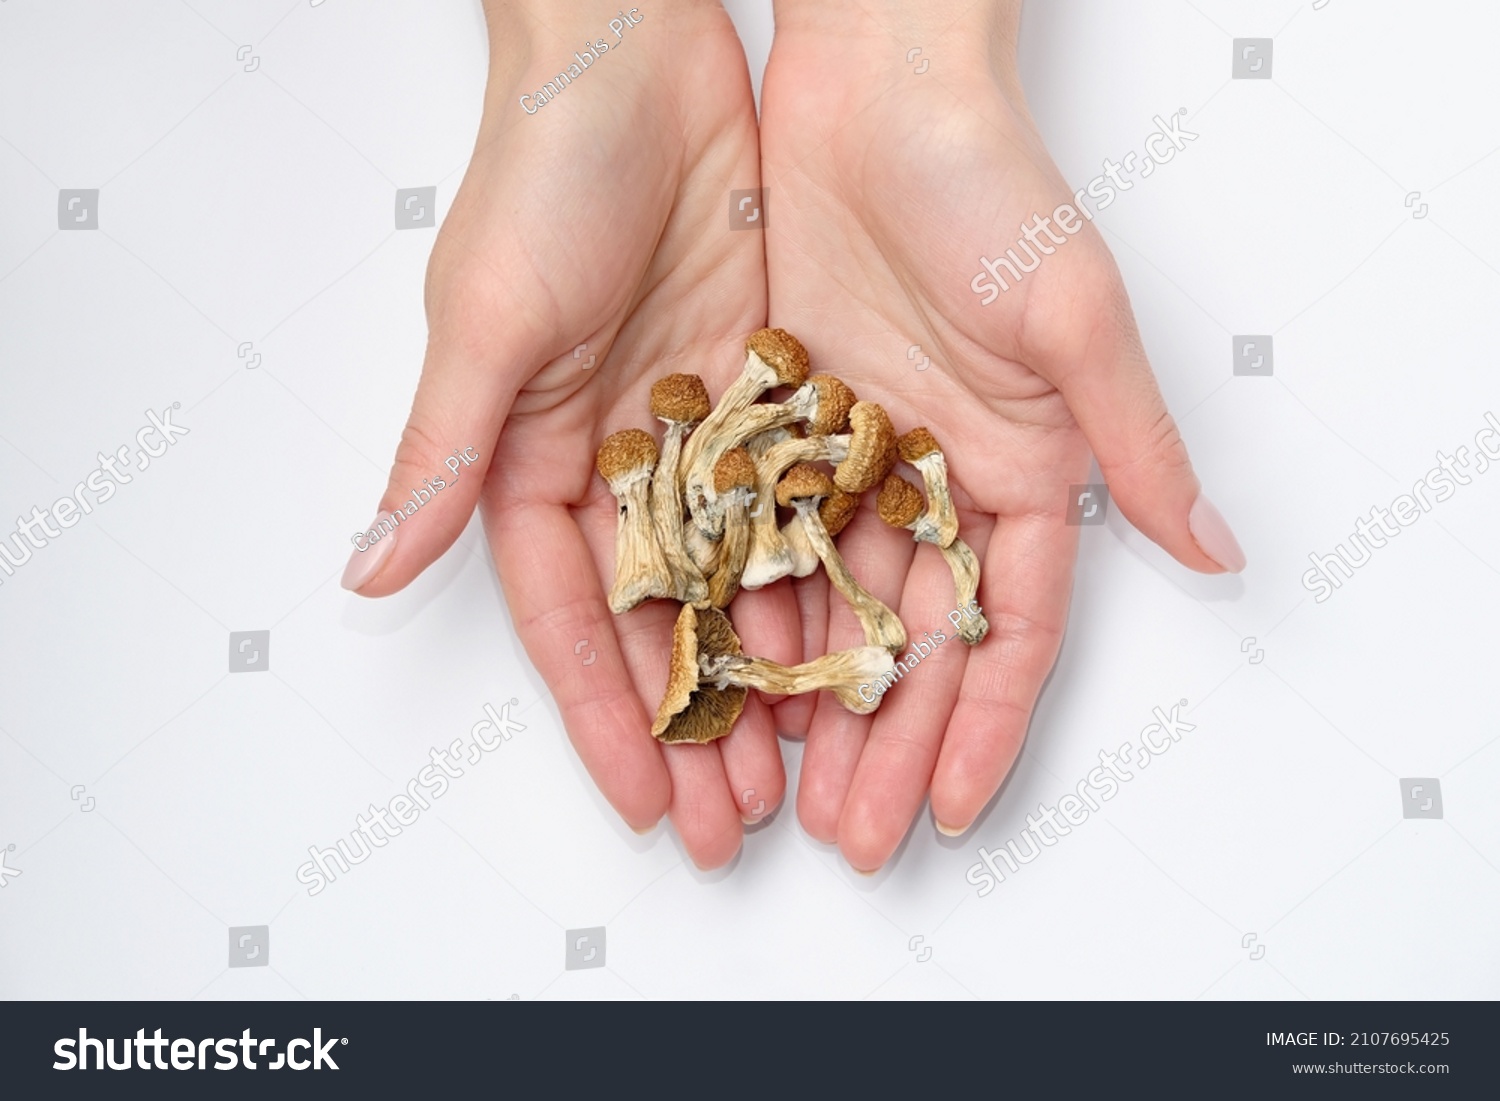 Psilocybin mushrooms in hands on white background.Isolated layout. Psychotropic therapy. #2107695425